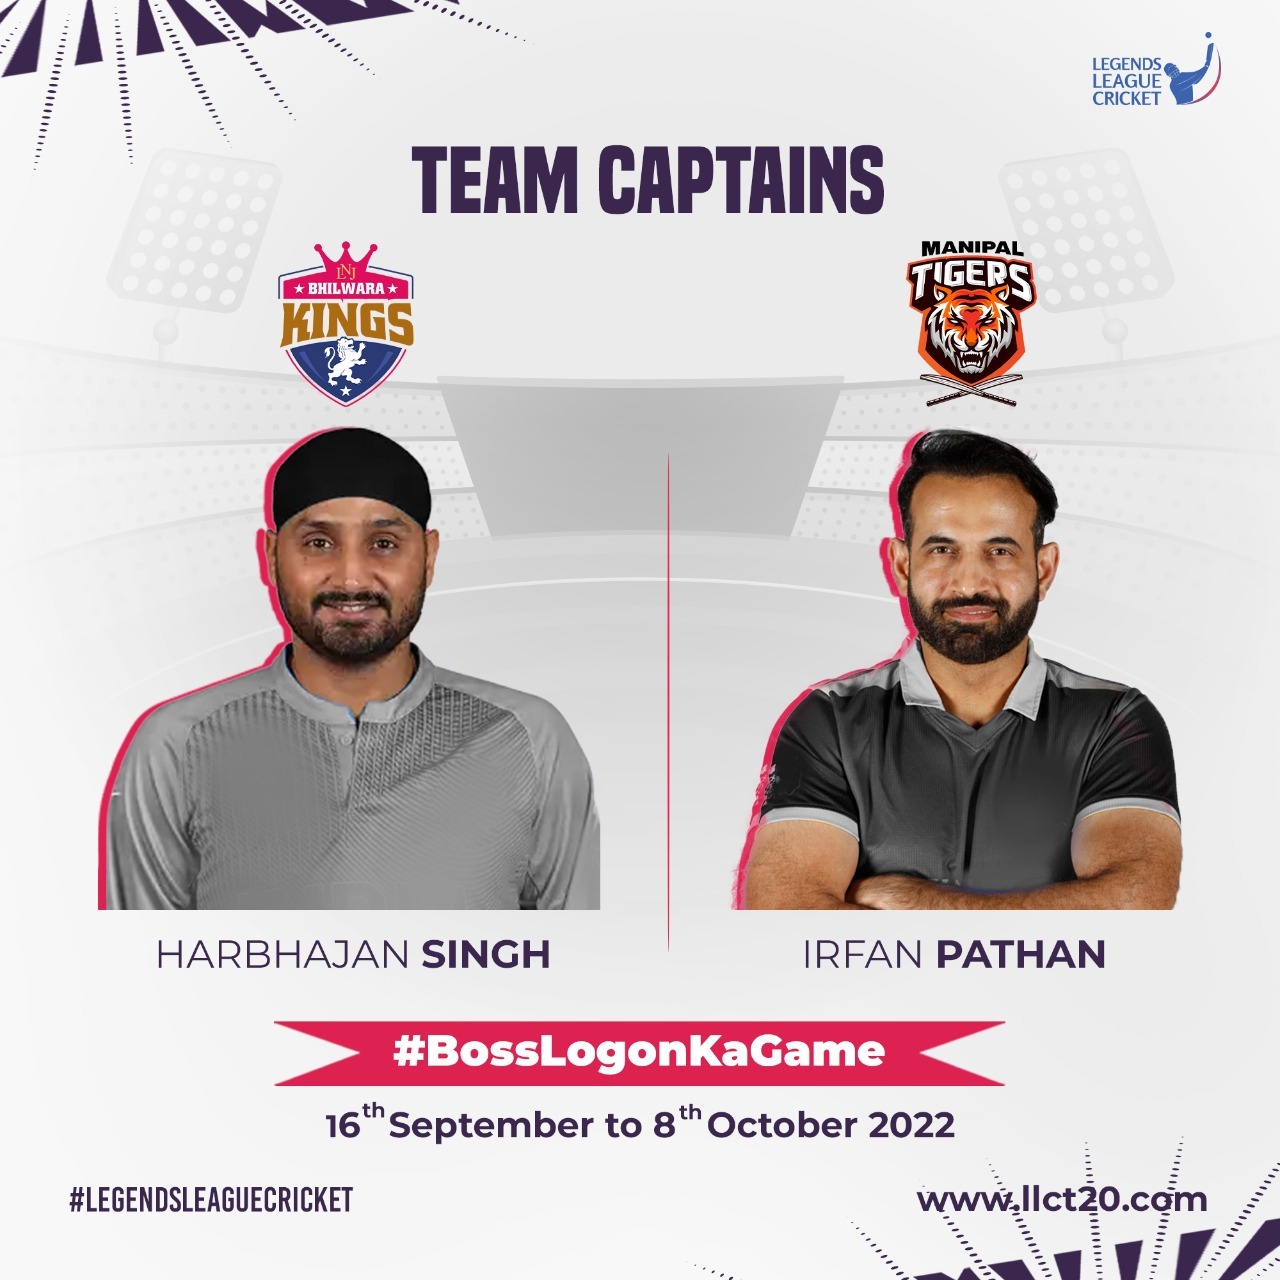 Legends League Cricket 2022 Team, Schedule, Scorecard, Season 2, Schedule, Live Score, Tickets, Table, Points Table India, Matches, Squads, Venues, Match Time, Live Telecast Channel In India and Live Streaming Details